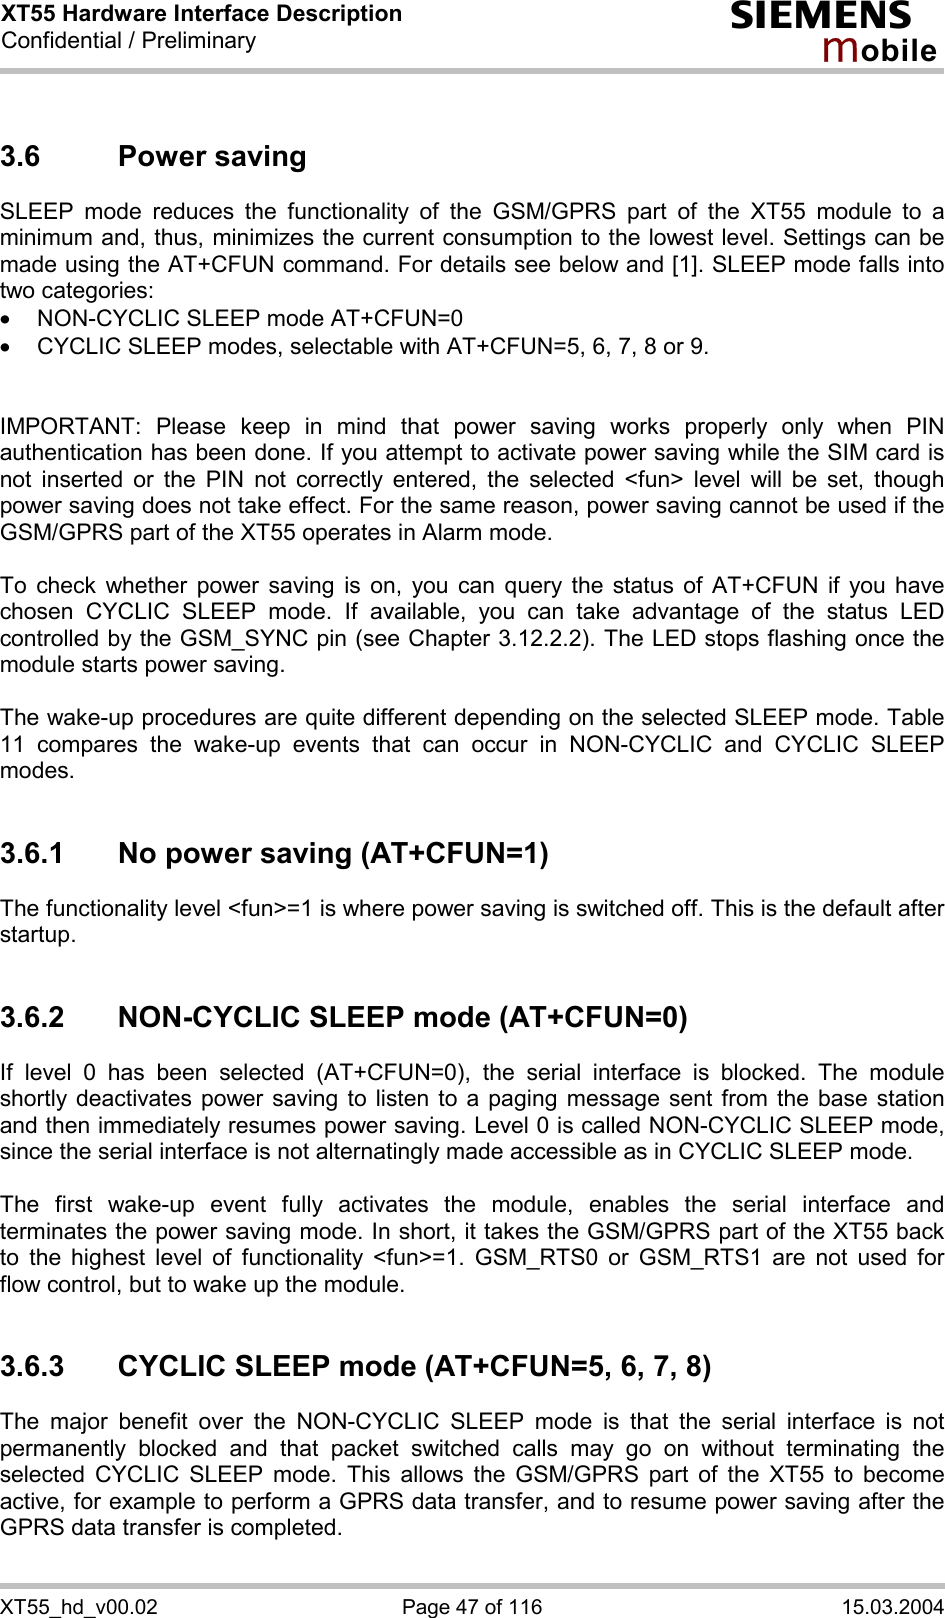 XT55 Hardware Interface Description Confidential / Preliminary s mo b i l e XT55_hd_v00.02  Page 47 of 116  15.03.2004 3.6 Power saving SLEEP mode reduces the functionality of the GSM/GPRS part of the XT55 module to a minimum and, thus, minimizes the current consumption to the lowest level. Settings can be made using the AT+CFUN command. For details see below and [1]. SLEEP mode falls into two categories: ·  NON-CYCLIC SLEEP mode AT+CFUN=0 ·  CYCLIC SLEEP modes, selectable with AT+CFUN=5, 6, 7, 8 or 9.   IMPORTANT: Please keep in mind that power saving works properly only when PIN authentication has been done. If you attempt to activate power saving while the SIM card is not inserted or the PIN not correctly entered, the selected &lt;fun&gt; level will be set, though power saving does not take effect. For the same reason, power saving cannot be used if the GSM/GPRS part of the XT55 operates in Alarm mode.  To check whether power saving is on, you can query the status of AT+CFUN if you have chosen CYCLIC SLEEP mode. If available, you can take advantage of the status LED controlled by the GSM_SYNC pin (see Chapter 3.12.2.2). The LED stops flashing once the module starts power saving.  The wake-up procedures are quite different depending on the selected SLEEP mode. Table 11 compares the wake-up events that can occur in NON-CYCLIC and CYCLIC SLEEP modes.  3.6.1  No power saving (AT+CFUN=1) The functionality level &lt;fun&gt;=1 is where power saving is switched off. This is the default after startup.   3.6.2  NON-CYCLIC SLEEP mode (AT+CFUN=0) If level 0 has been selected (AT+CFUN=0), the serial interface is blocked. The module shortly deactivates power saving to listen to a paging message sent from the base station and then immediately resumes power saving. Level 0 is called NON-CYCLIC SLEEP mode, since the serial interface is not alternatingly made accessible as in CYCLIC SLEEP mode.  The first wake-up event fully activates the module, enables the serial interface and terminates the power saving mode. In short, it takes the GSM/GPRS part of the XT55 back to the highest level of functionality &lt;fun&gt;=1. GSM_RTS0 or GSM_RTS1 are not used for flow control, but to wake up the module.  3.6.3  CYCLIC SLEEP mode (AT+CFUN=5, 6, 7, 8) The major benefit over the NON-CYCLIC SLEEP mode is that the serial interface is not permanently blocked and that packet switched calls may go on without terminating the selected CYCLIC SLEEP mode. This allows the GSM/GPRS part of the XT55 to become active, for example to perform a GPRS data transfer, and to resume power saving after the GPRS data transfer is completed.  